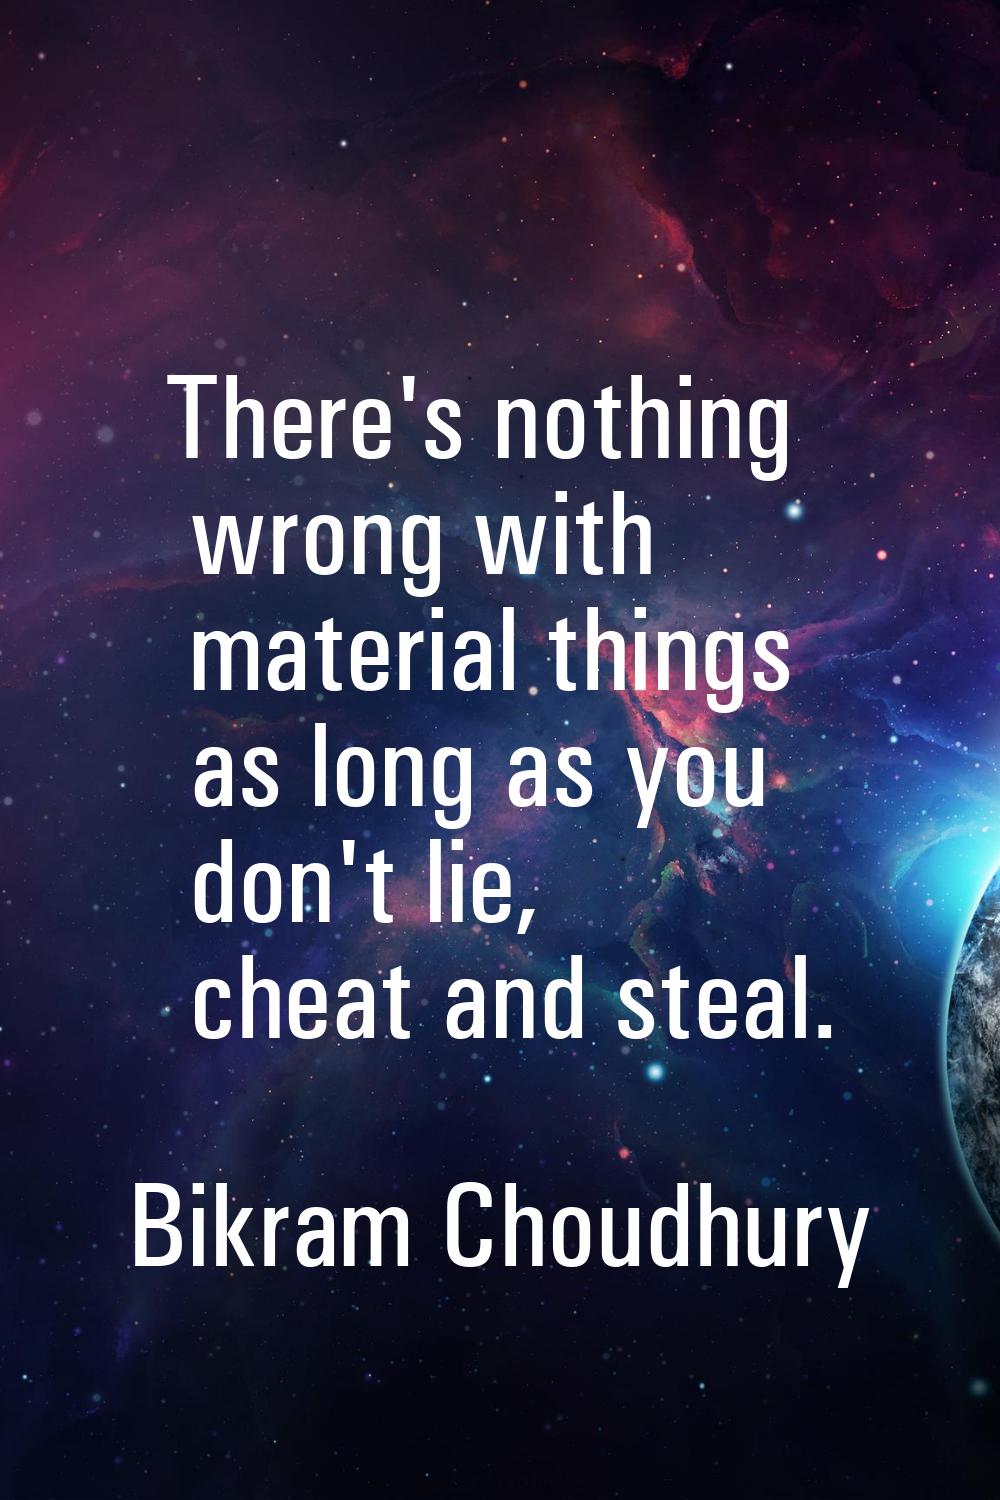 There's nothing wrong with material things as long as you don't lie, cheat and steal.